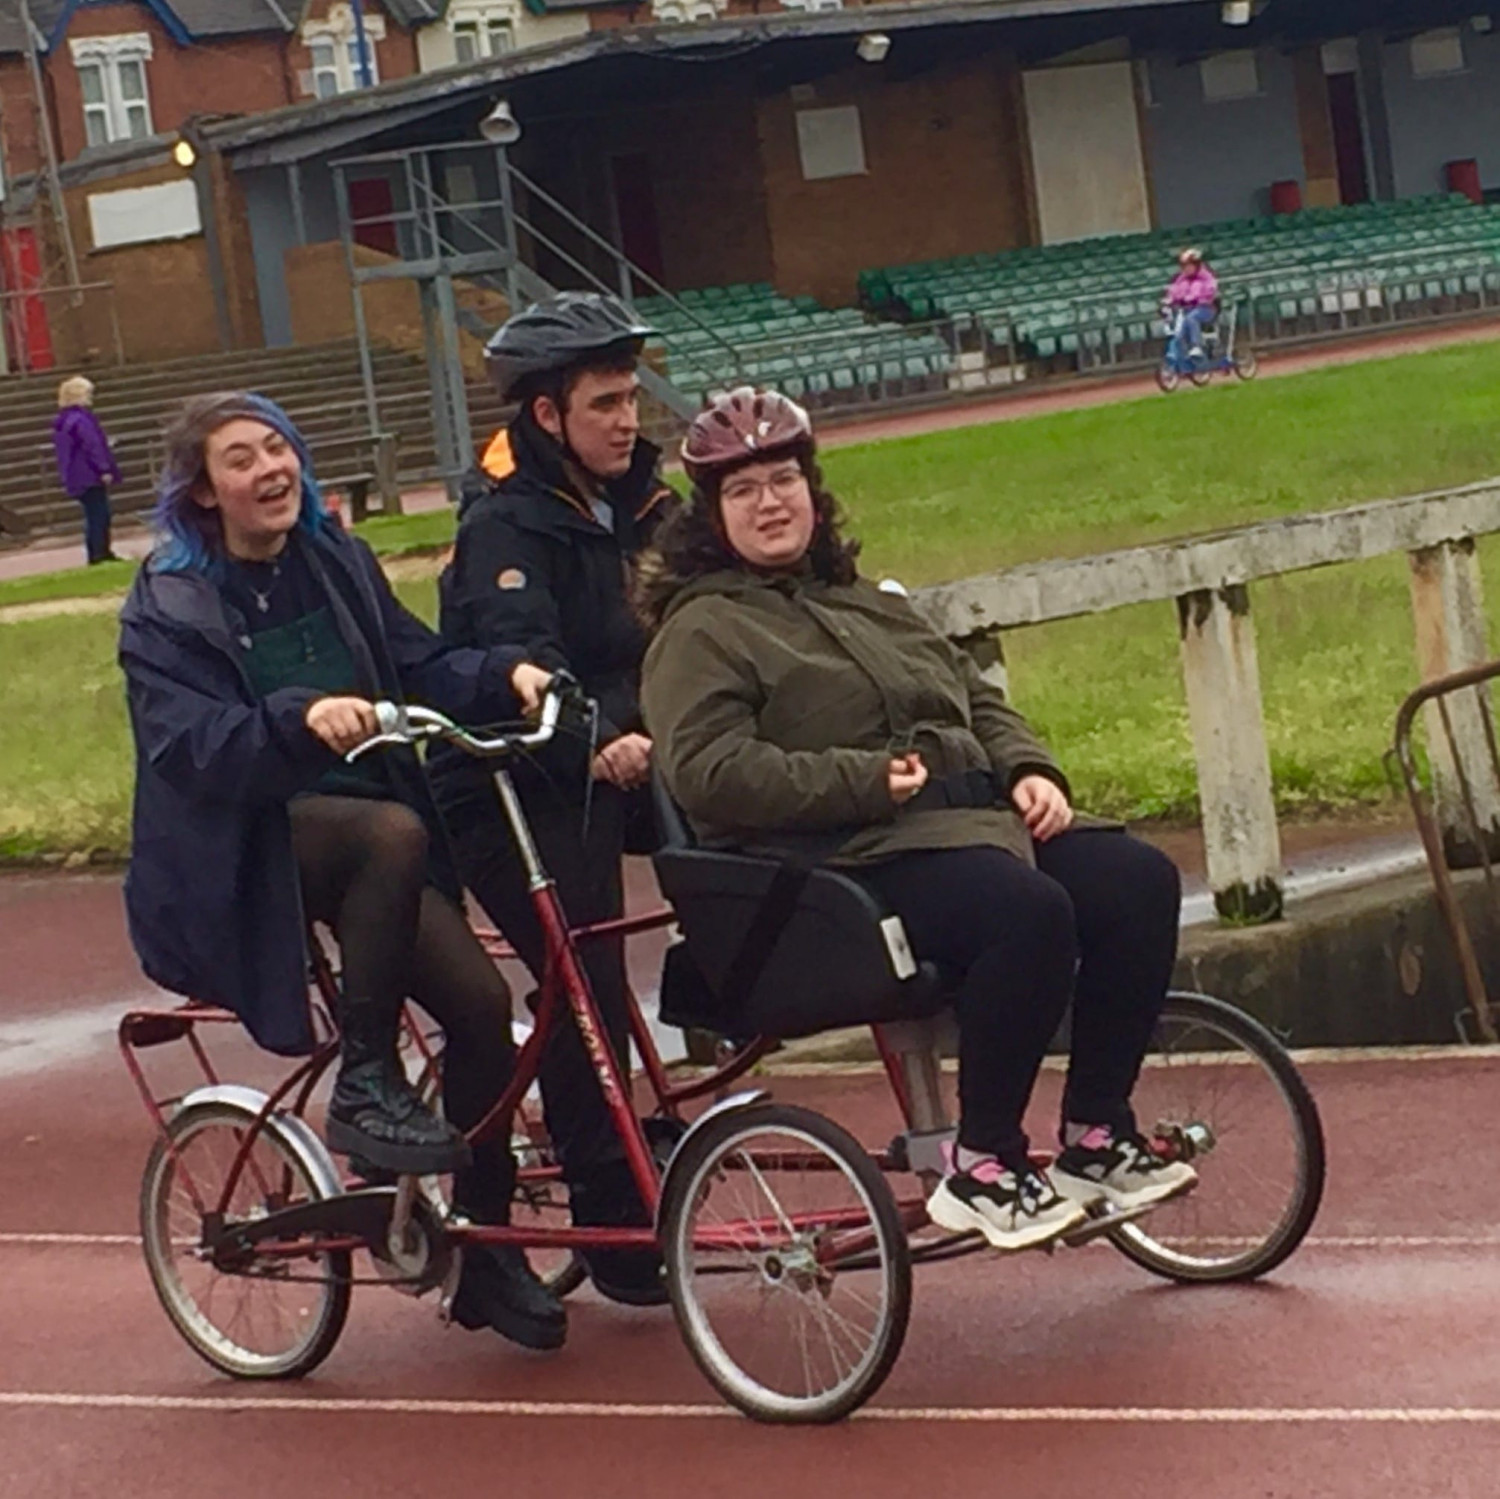 Adapted bike riding on track